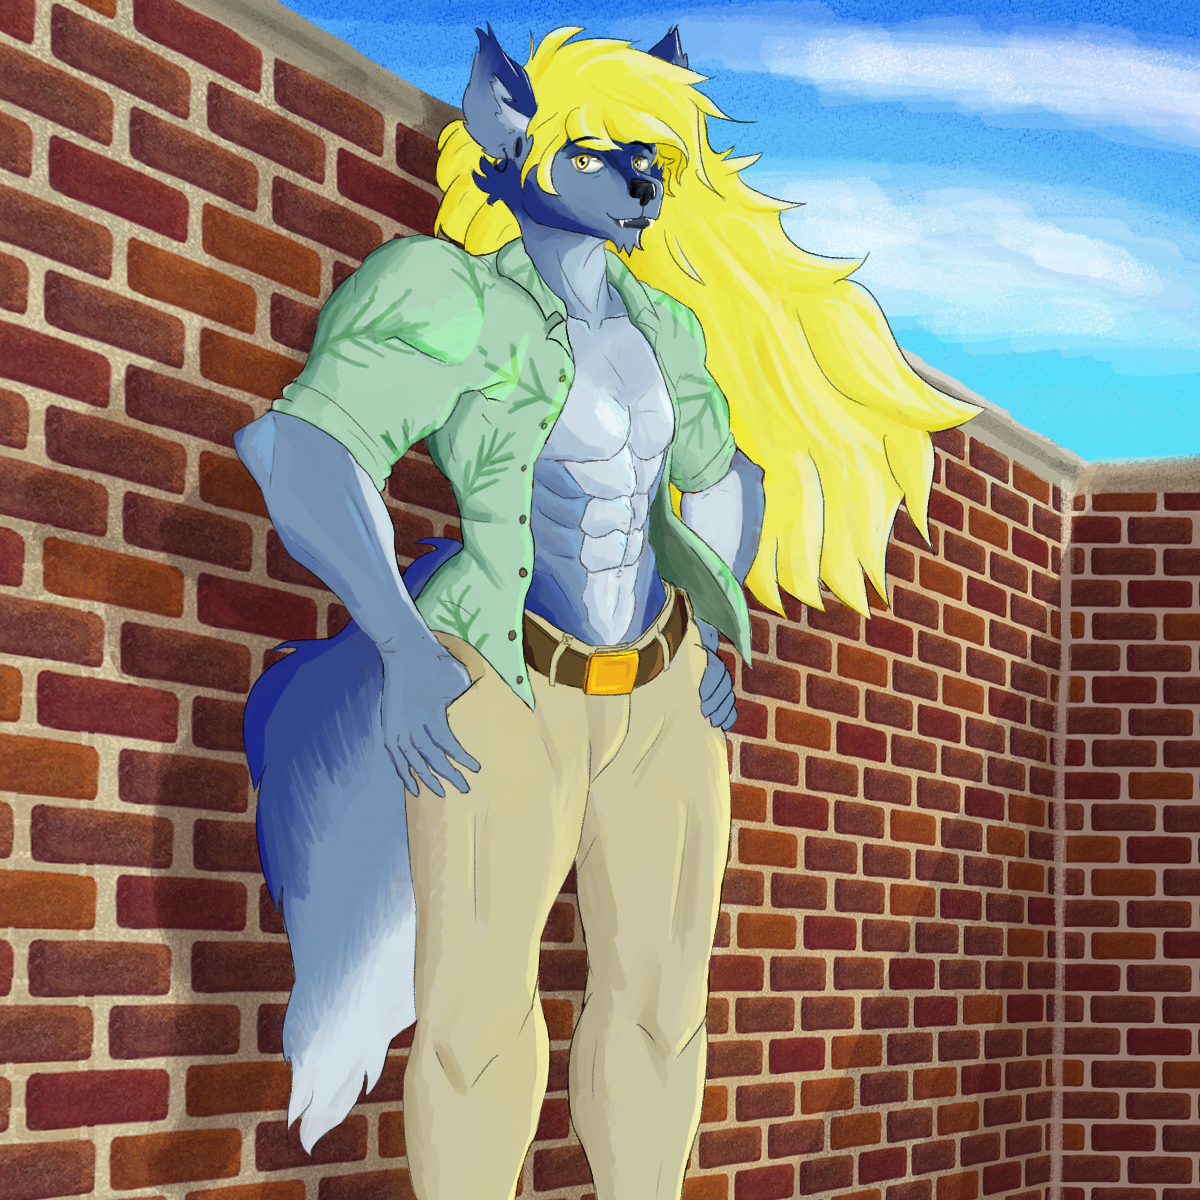 Photo of Marcel on vacation, with his shirt opened and his hands on his hips, against a brick wall outside.